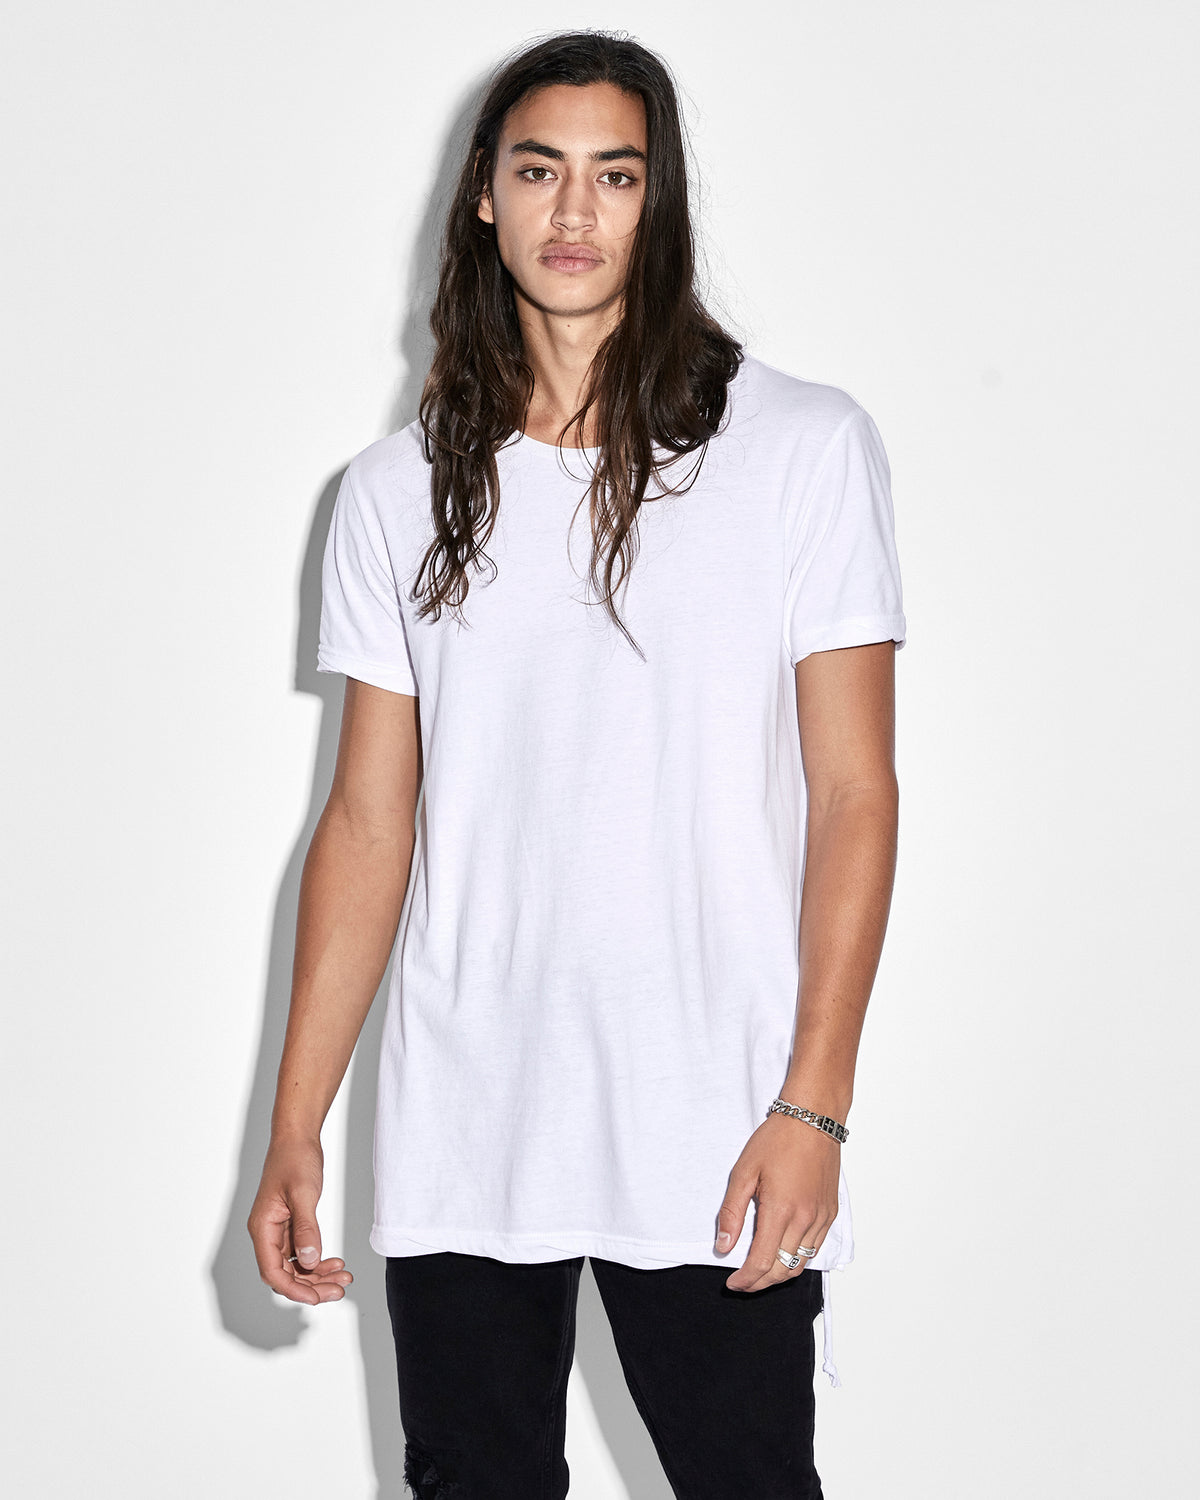 SEEING LINES SS TEE WHITE